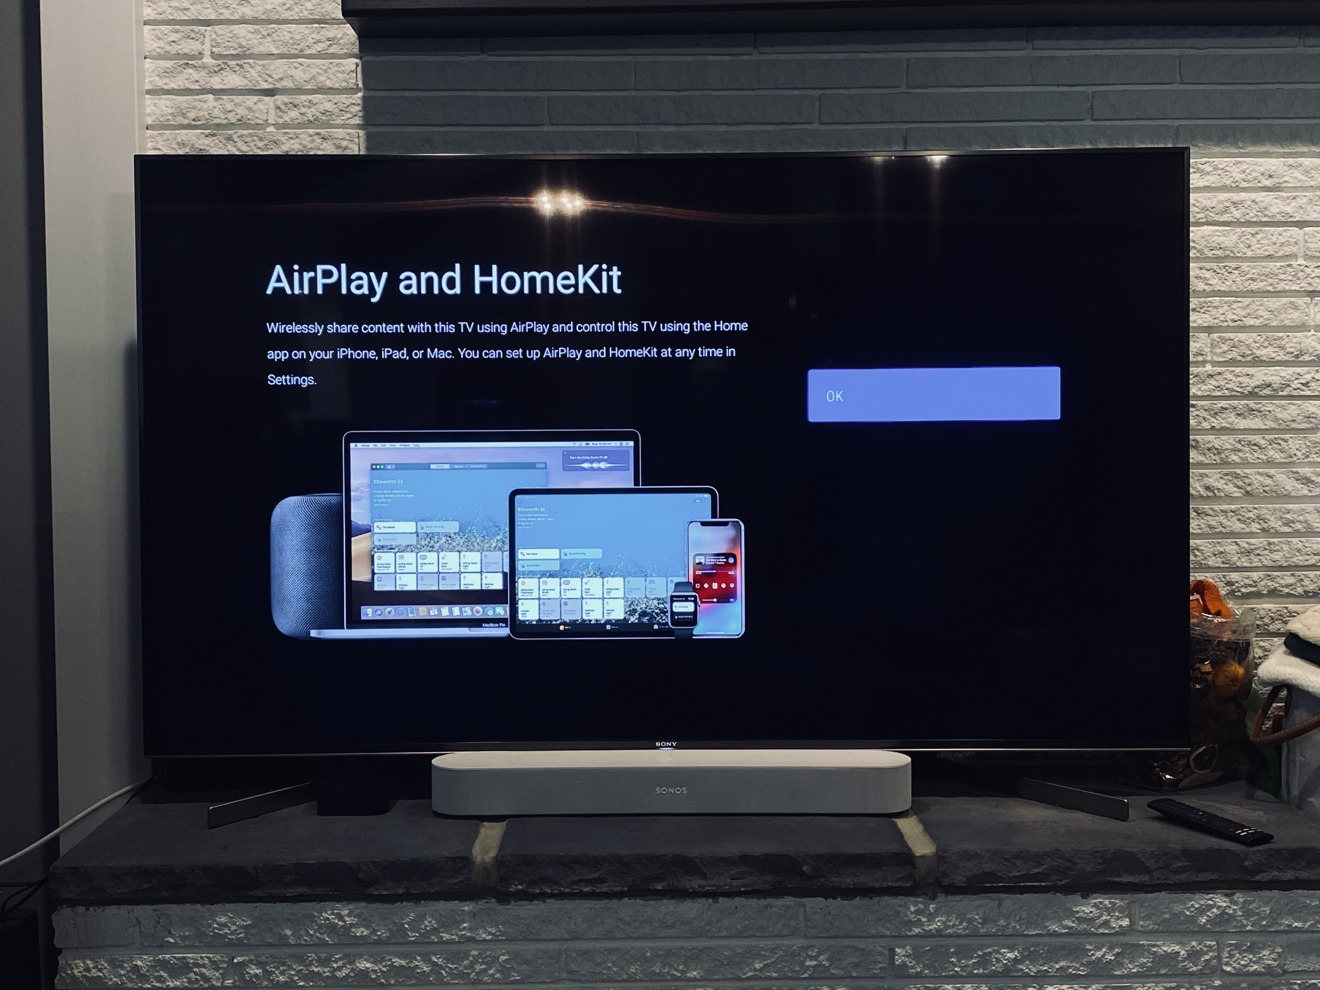 Hot And Airplay 2 On Sony Smart Tvs, Screen Mirror Iphone To Sony Tv Without Apple